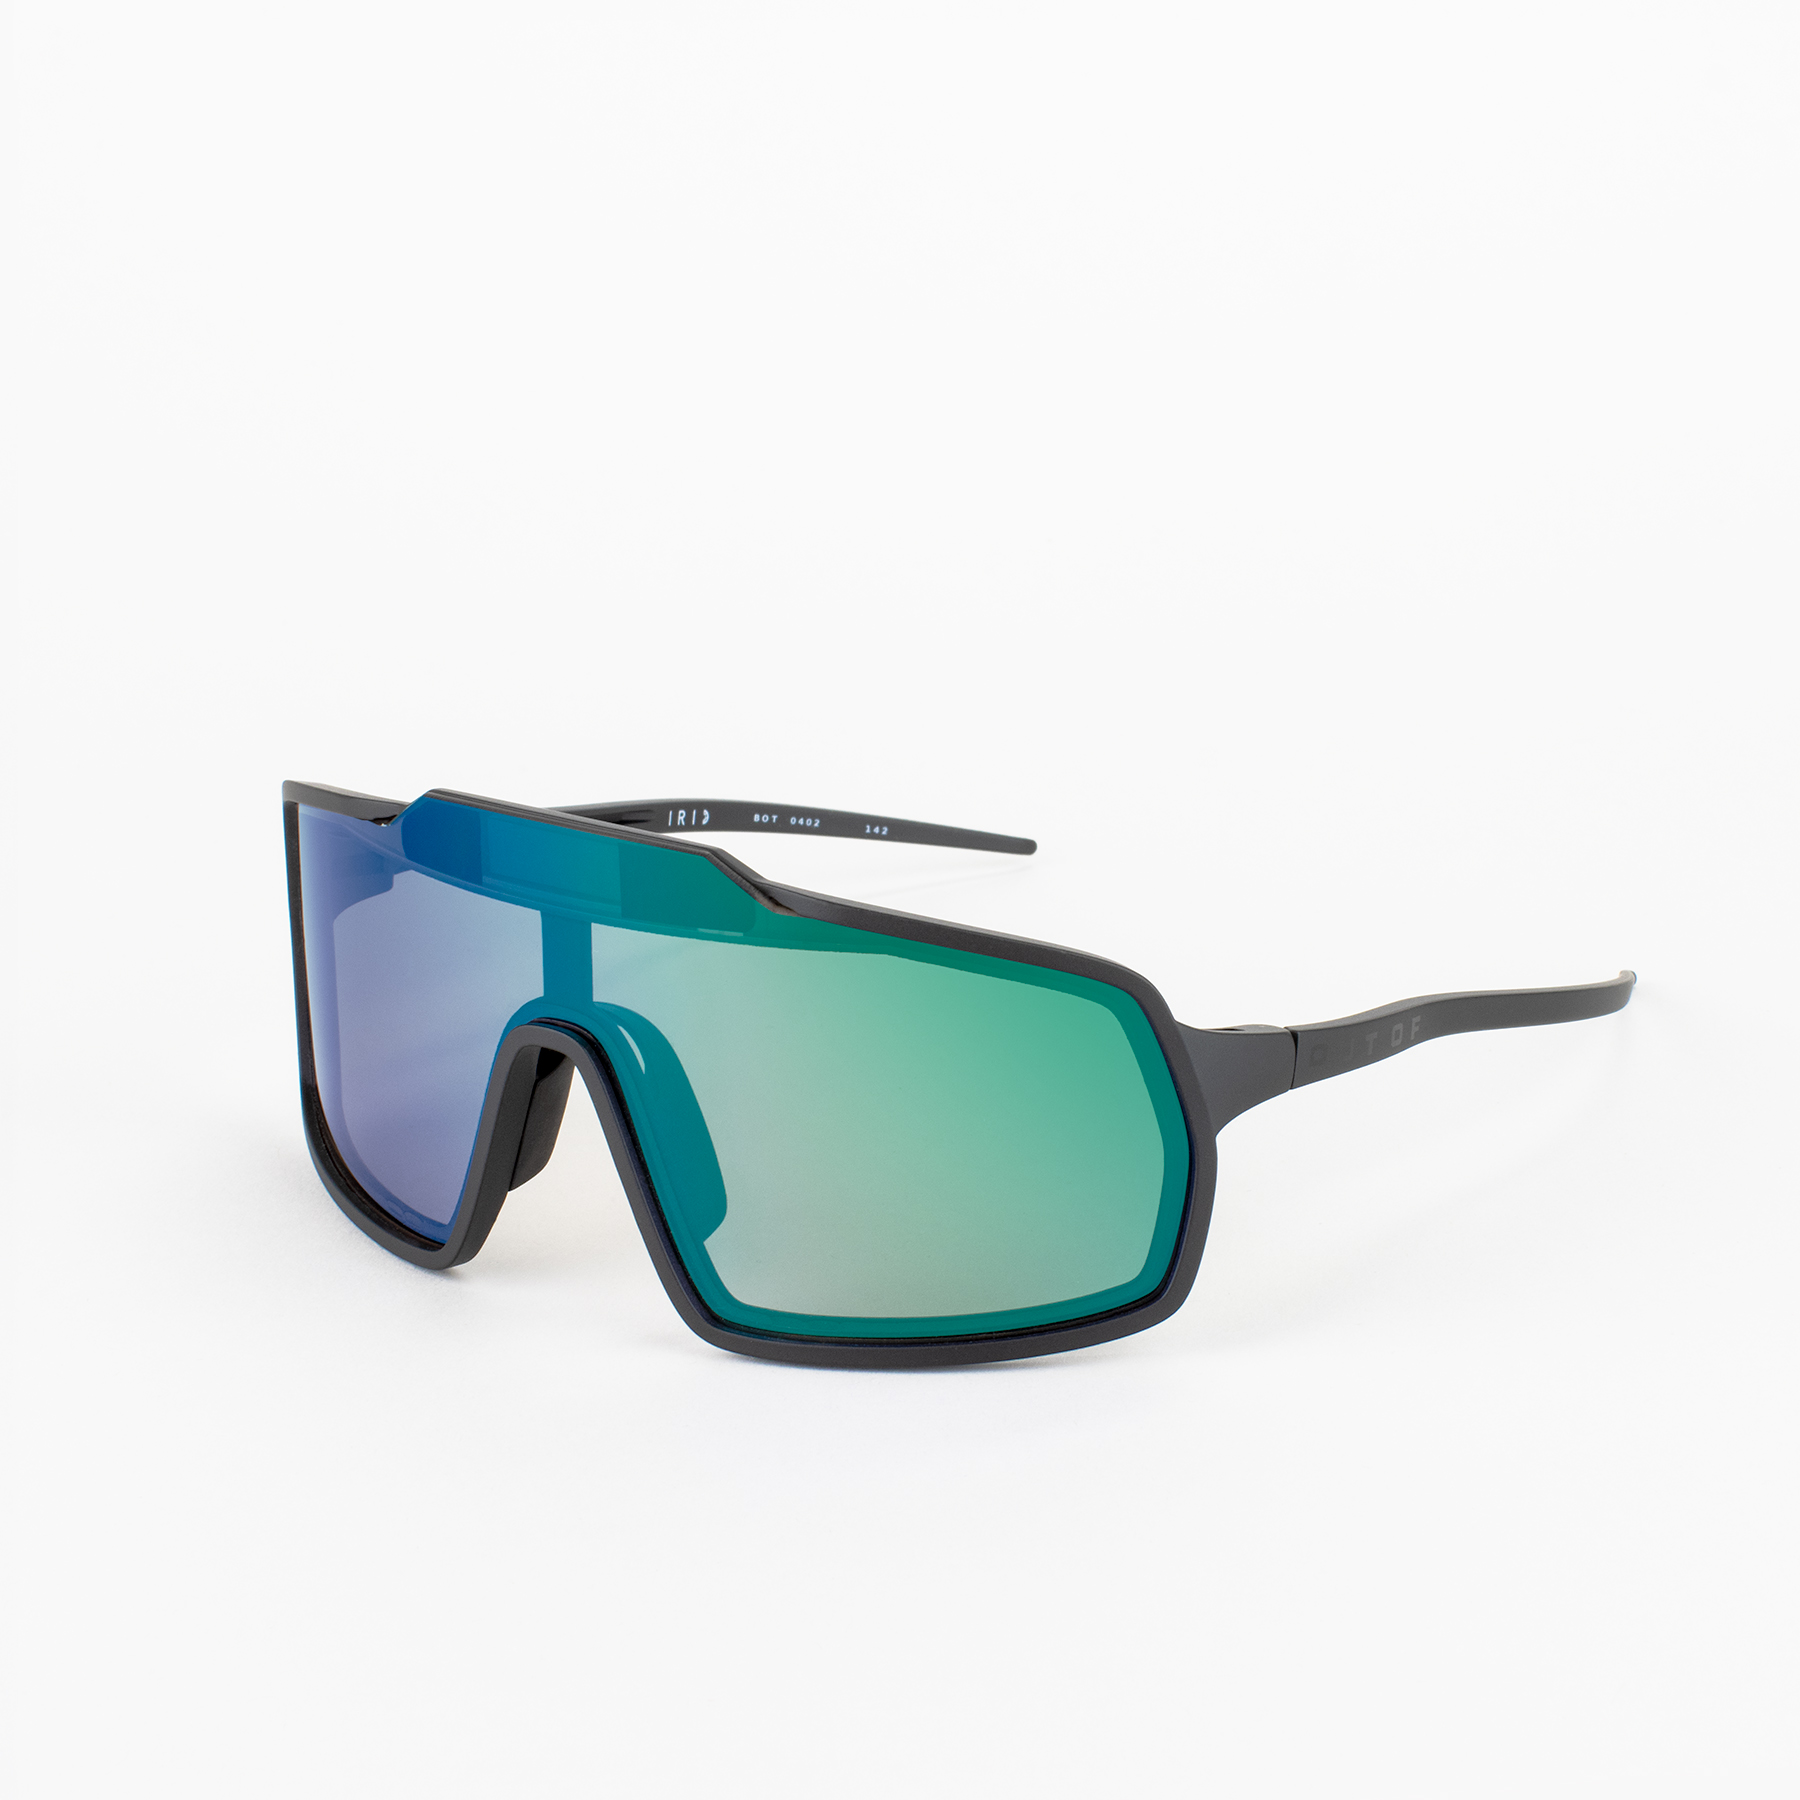 Bot 2 electronic sunglasses with IRID green lens